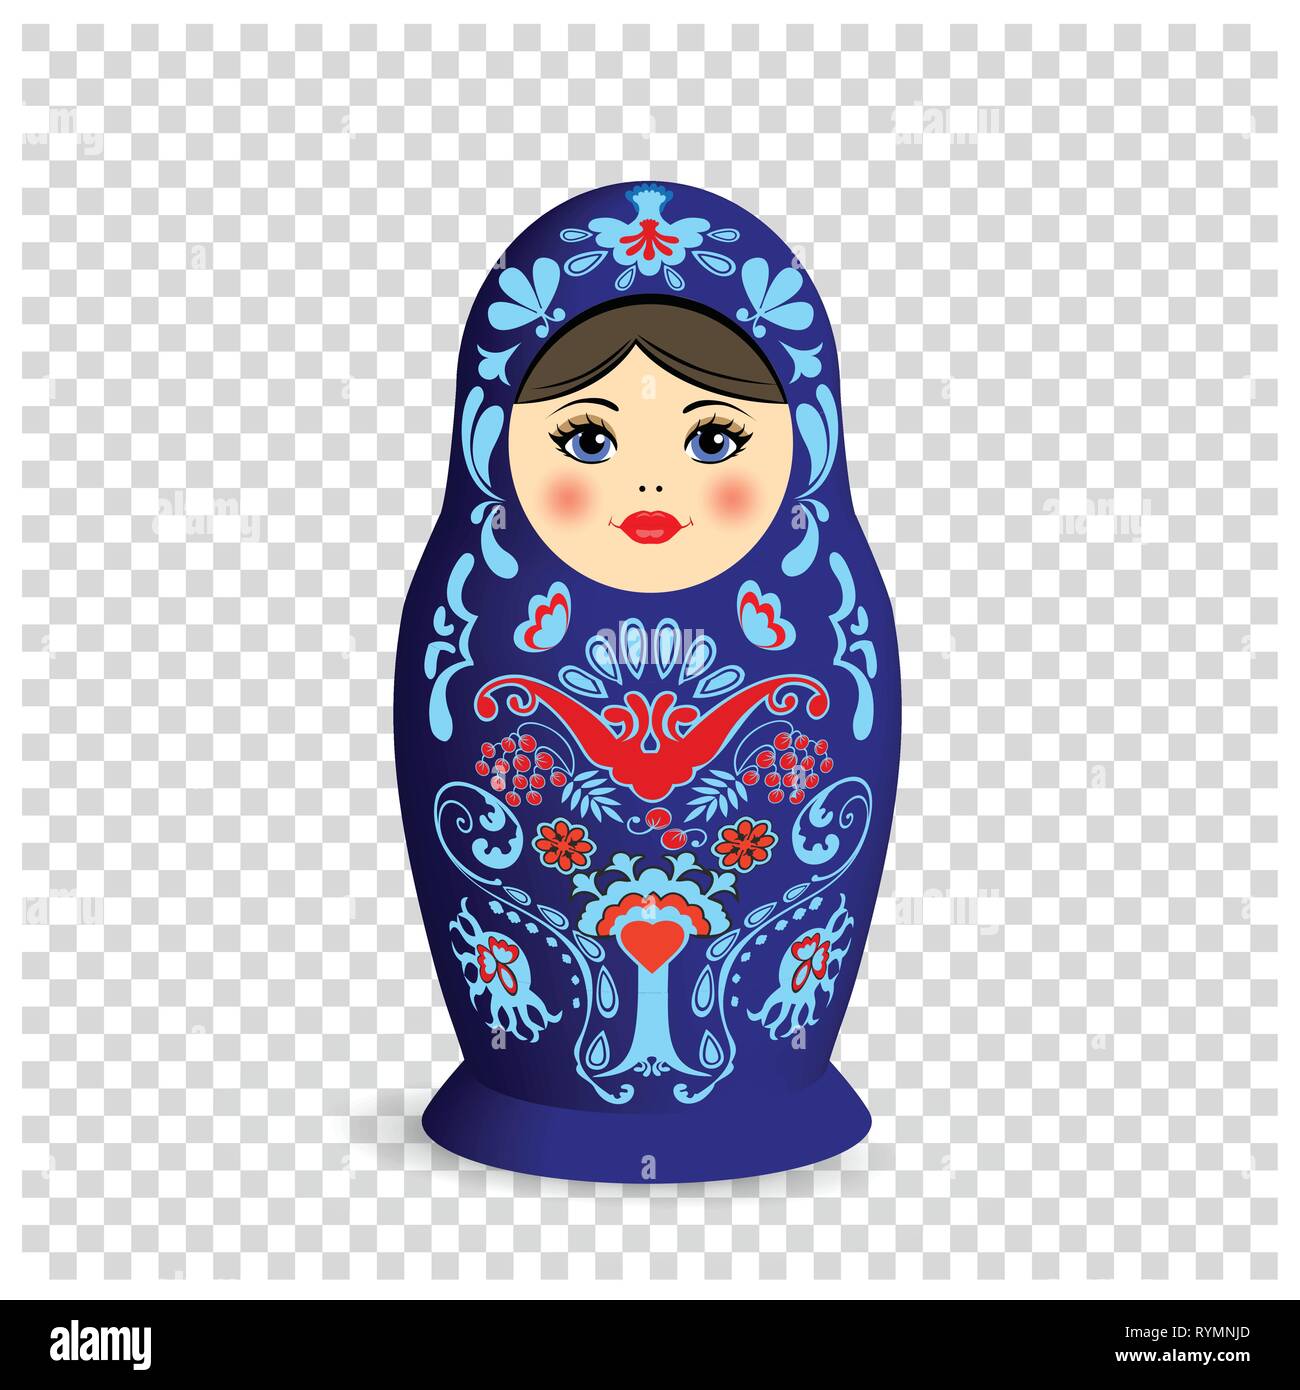 Russian nesting doll with ornamental pattern. on tranparent background Stock Vector